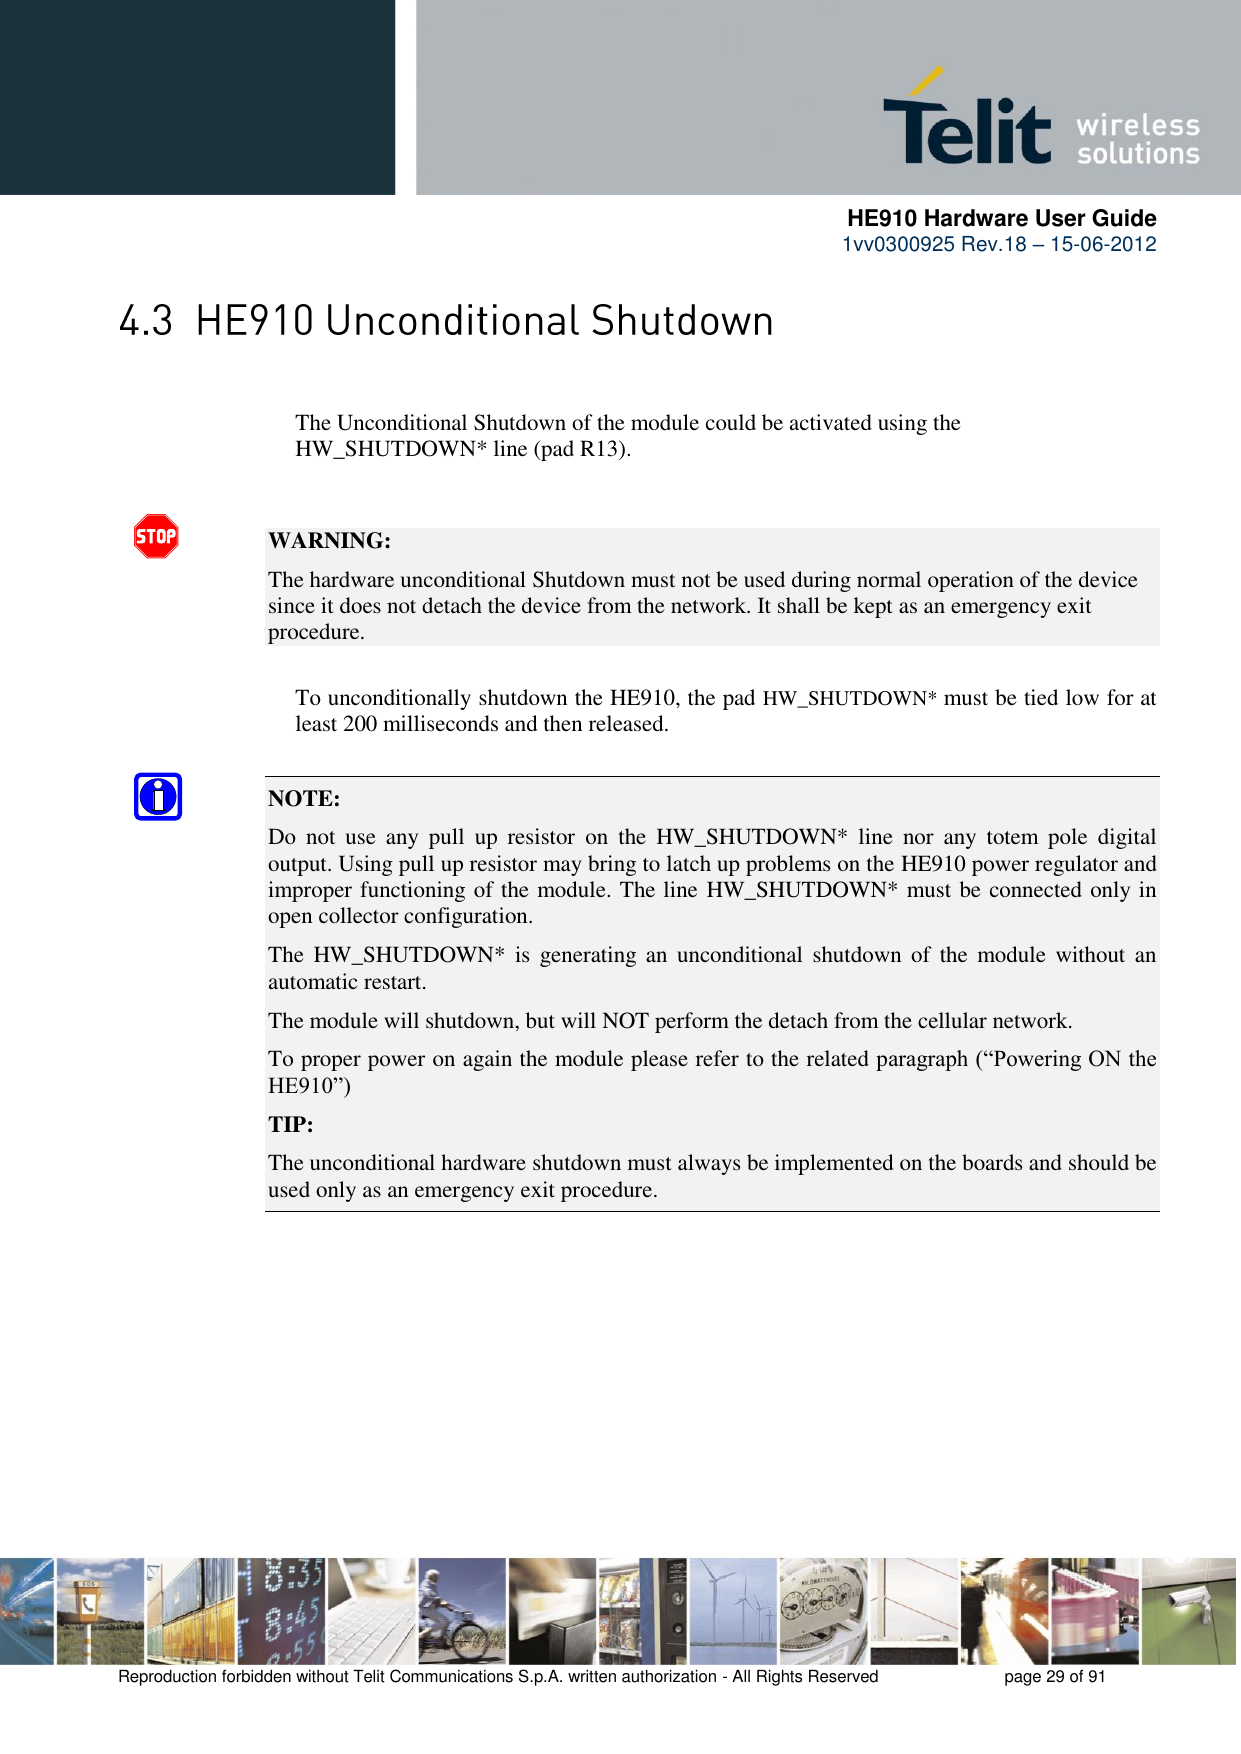      HE910 Hardware User Guide 1vv0300925 Rev.18 – 15-06-2012    Reproduction forbidden without Telit Communications S.p.A. written authorization - All Rights Reserved    page 29 of 91        The Unconditional Shutdown of the module could be activated using the        HW_SHUTDOWN* line (pad R13).   WARNING: The hardware unconditional Shutdown must not be used during normal operation of the device since it does not detach the device from the network. It shall be kept as an emergency exit procedure.      To unconditionally shutdown the HE910, the pad HW_SHUTDOWN* must be tied low for at     least 200 milliseconds and then released.  NOTE:  Do  not  use  any  pull  up  resistor  on  the  HW_SHUTDOWN*  line  nor  any  totem  pole  digital output. Using pull up resistor may bring to latch up problems on the HE910 power regulator and improper functioning of the module. The line HW_SHUTDOWN* must be connected only in open collector configuration. The  HW_SHUTDOWN*  is  generating  an  unconditional shutdown of  the  module  without an automatic restart. The module will shutdown, but will NOT perform the detach from the cellular network. To proper power on again the module please refer to the related paragraph (“Powering ON the HE910”) TIP: The unconditional hardware shutdown must always be implemented on the boards and should be used only as an emergency exit procedure. 